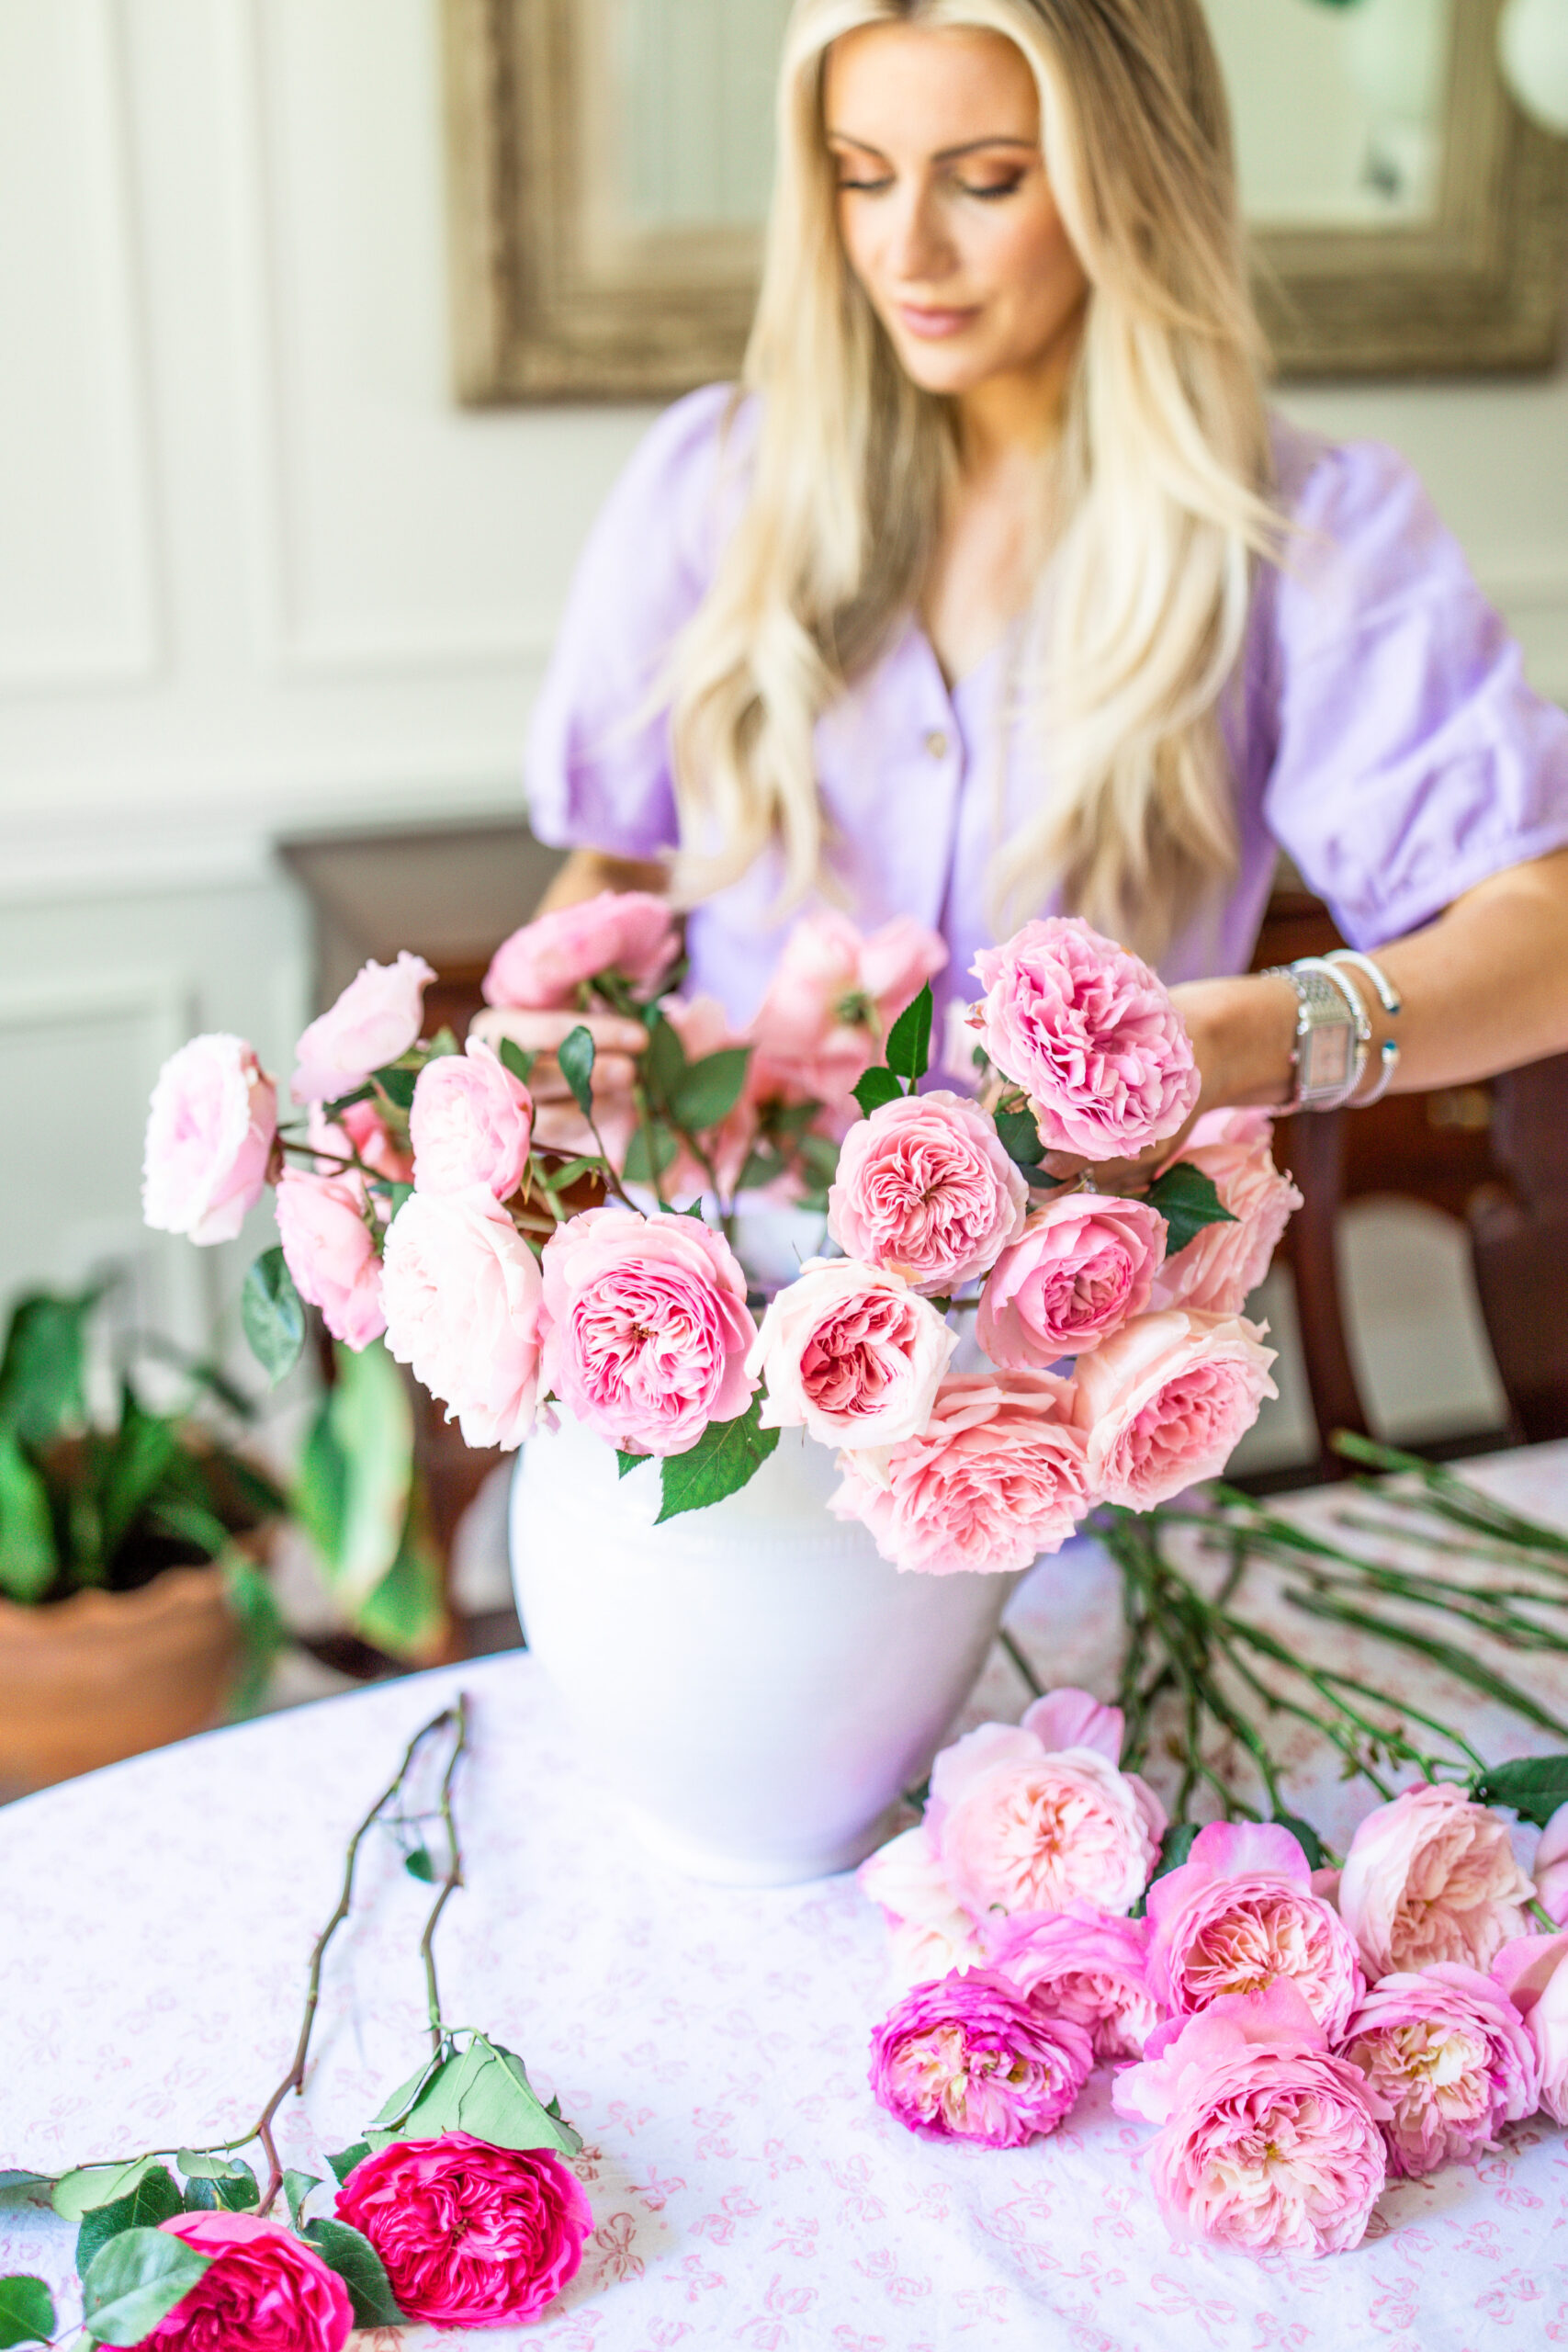 How to Create a Full and Fabulous Arrangement of Roses